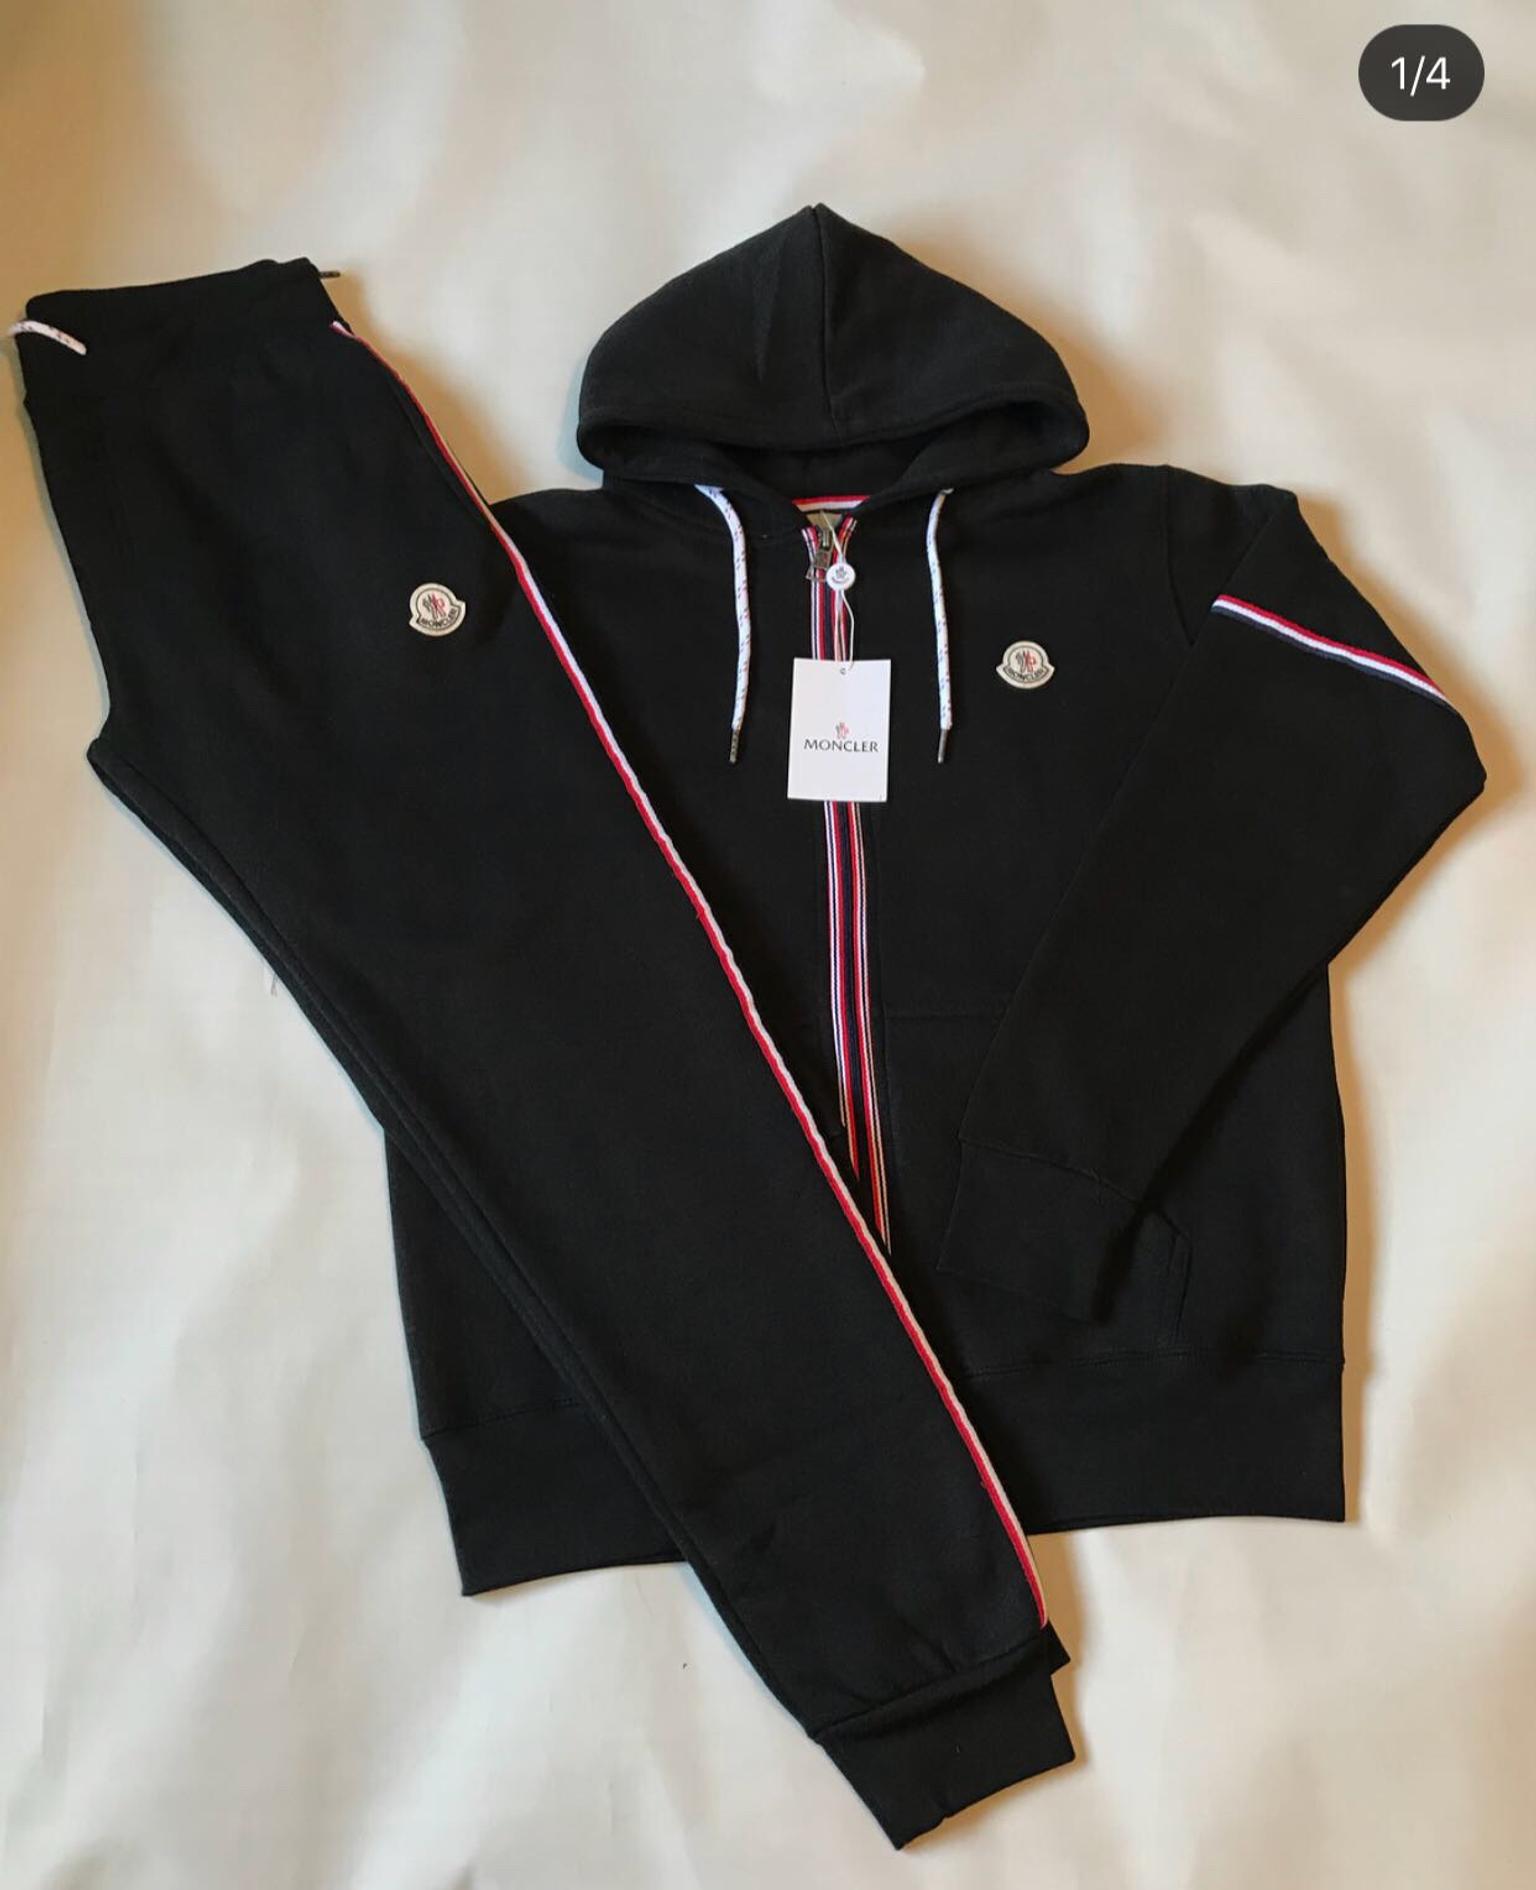 Moncler Tracksuit - SMALL AND XL ONLY 